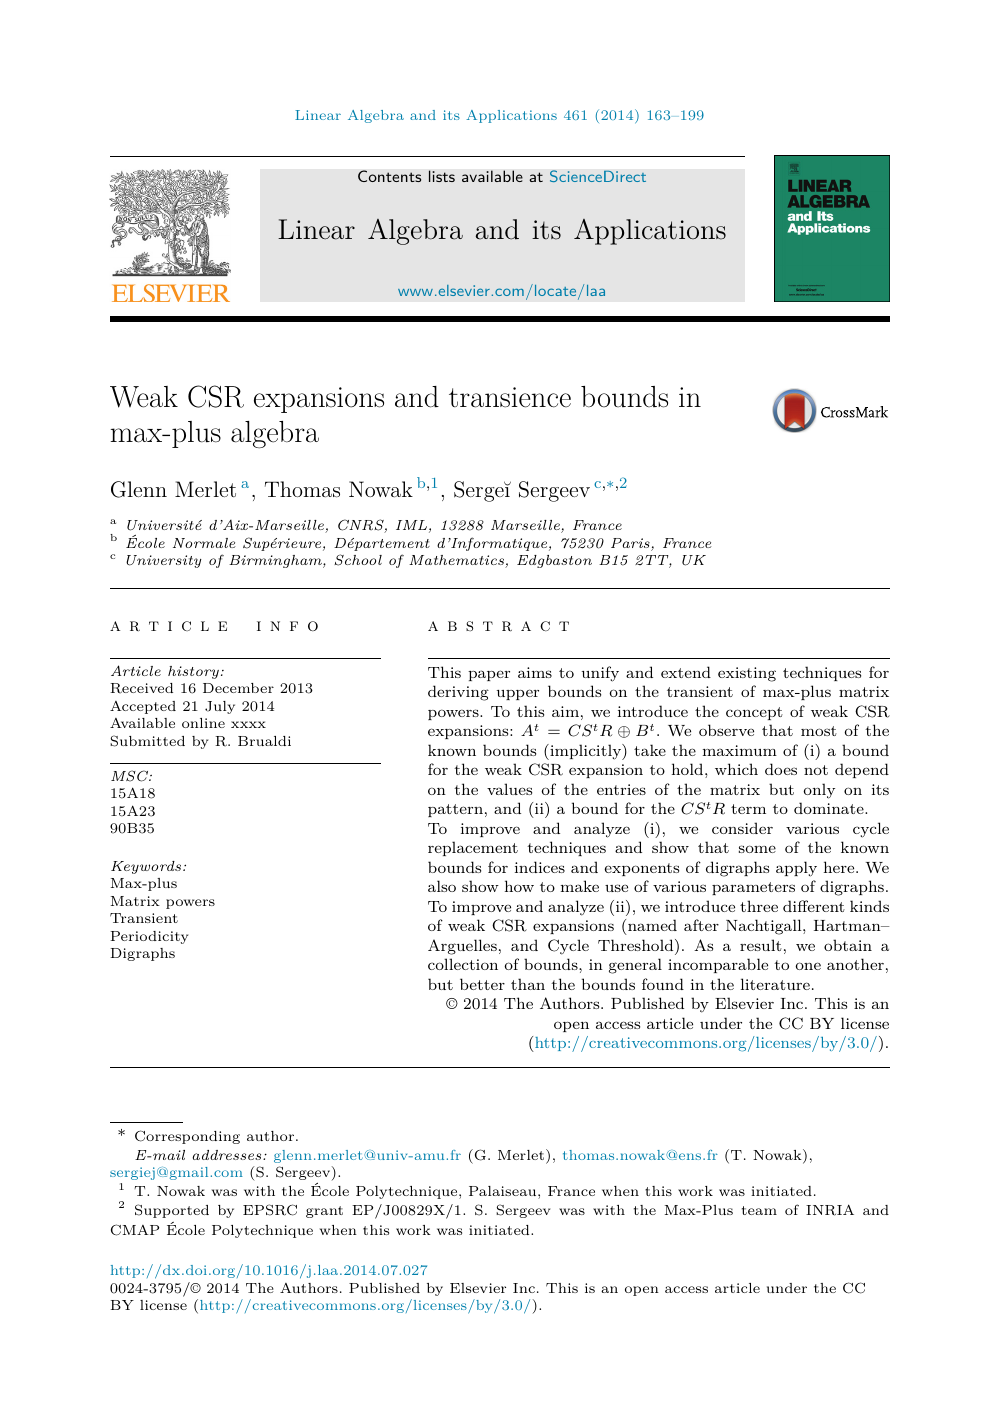 Weak Csr Expansions And Transience Bounds In Max Plus Algebra Topic Of Research Paper In Computer And Information Sciences Download Scholarly Article Pdf And Read For Free On Cyberleninka Open Science Hub